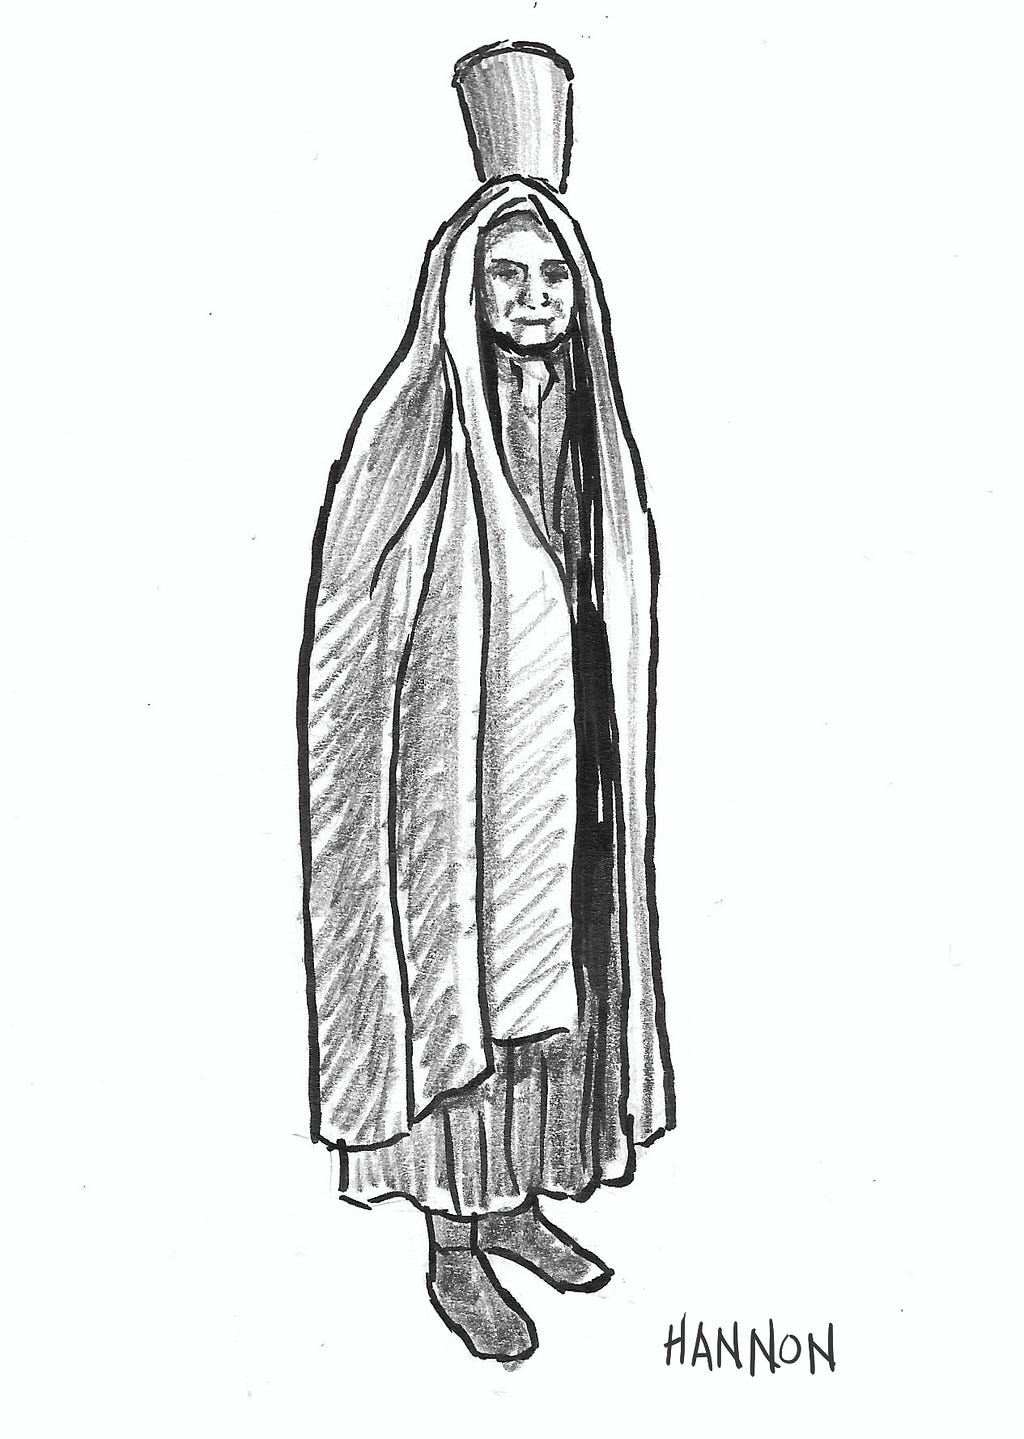 A woman in robes and a hood carries a bucket on her head.